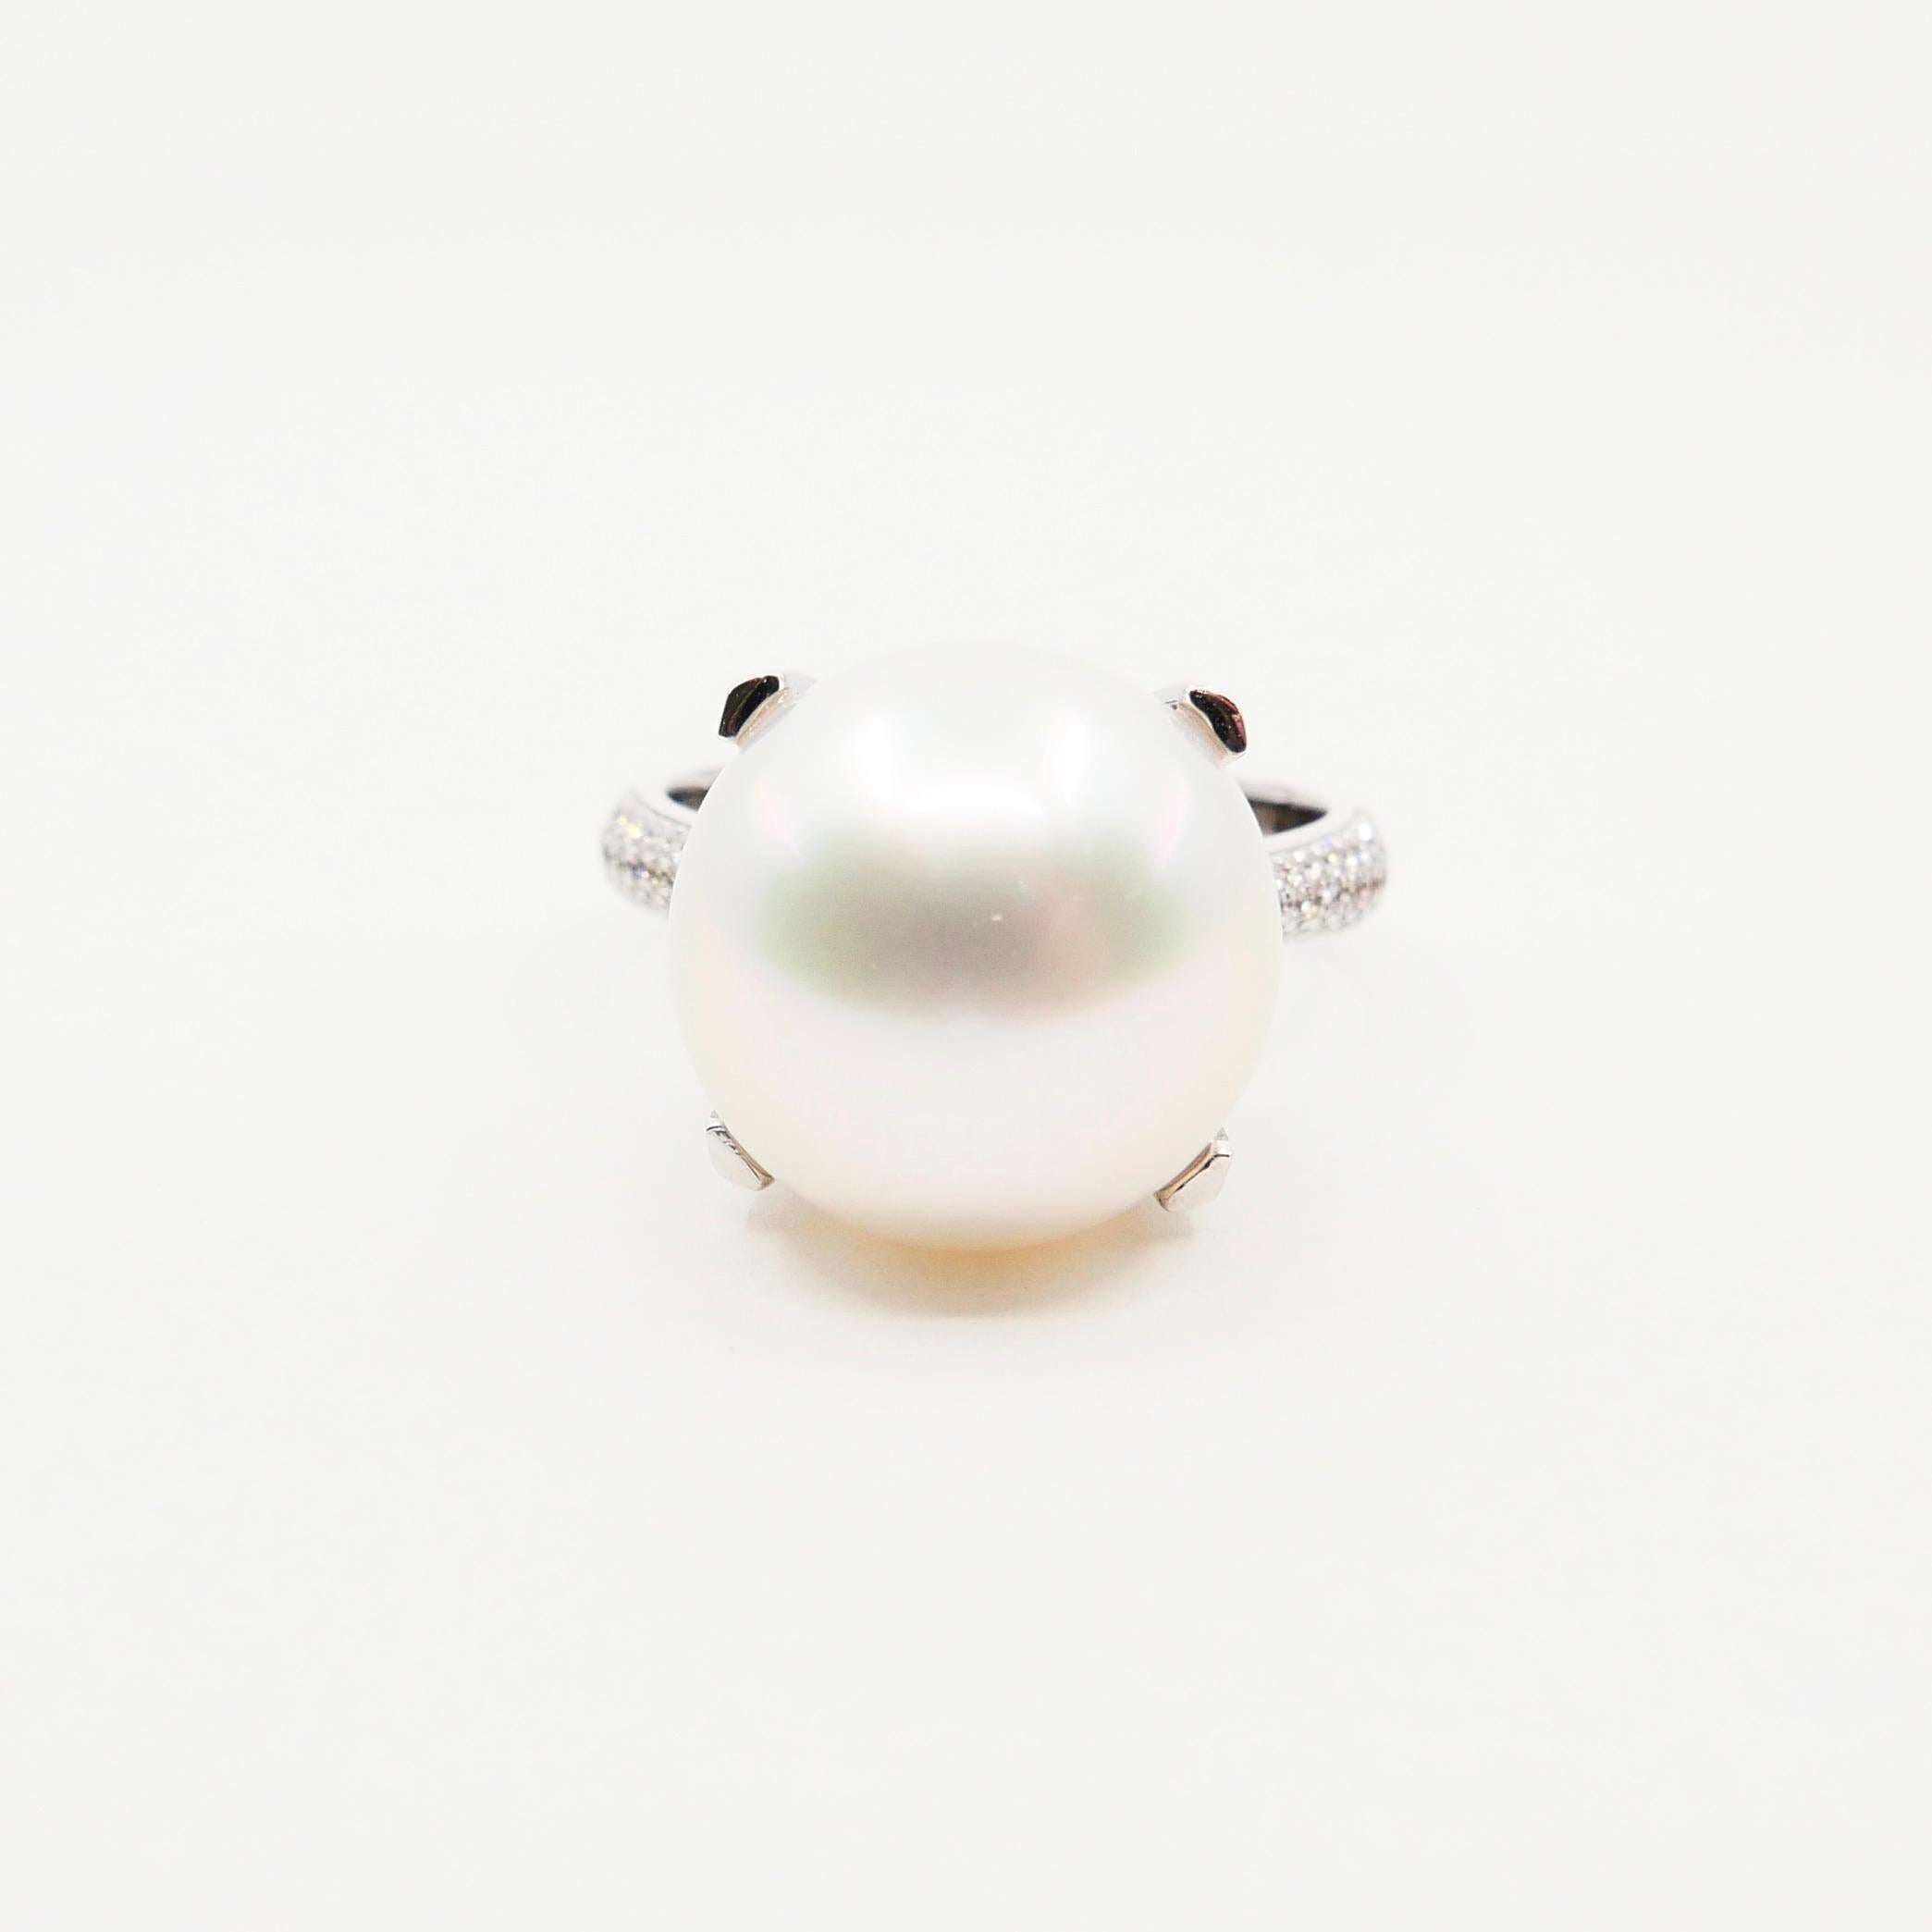 Certified South Sea Pearl and Diamond Ring, Our Signature Design 3